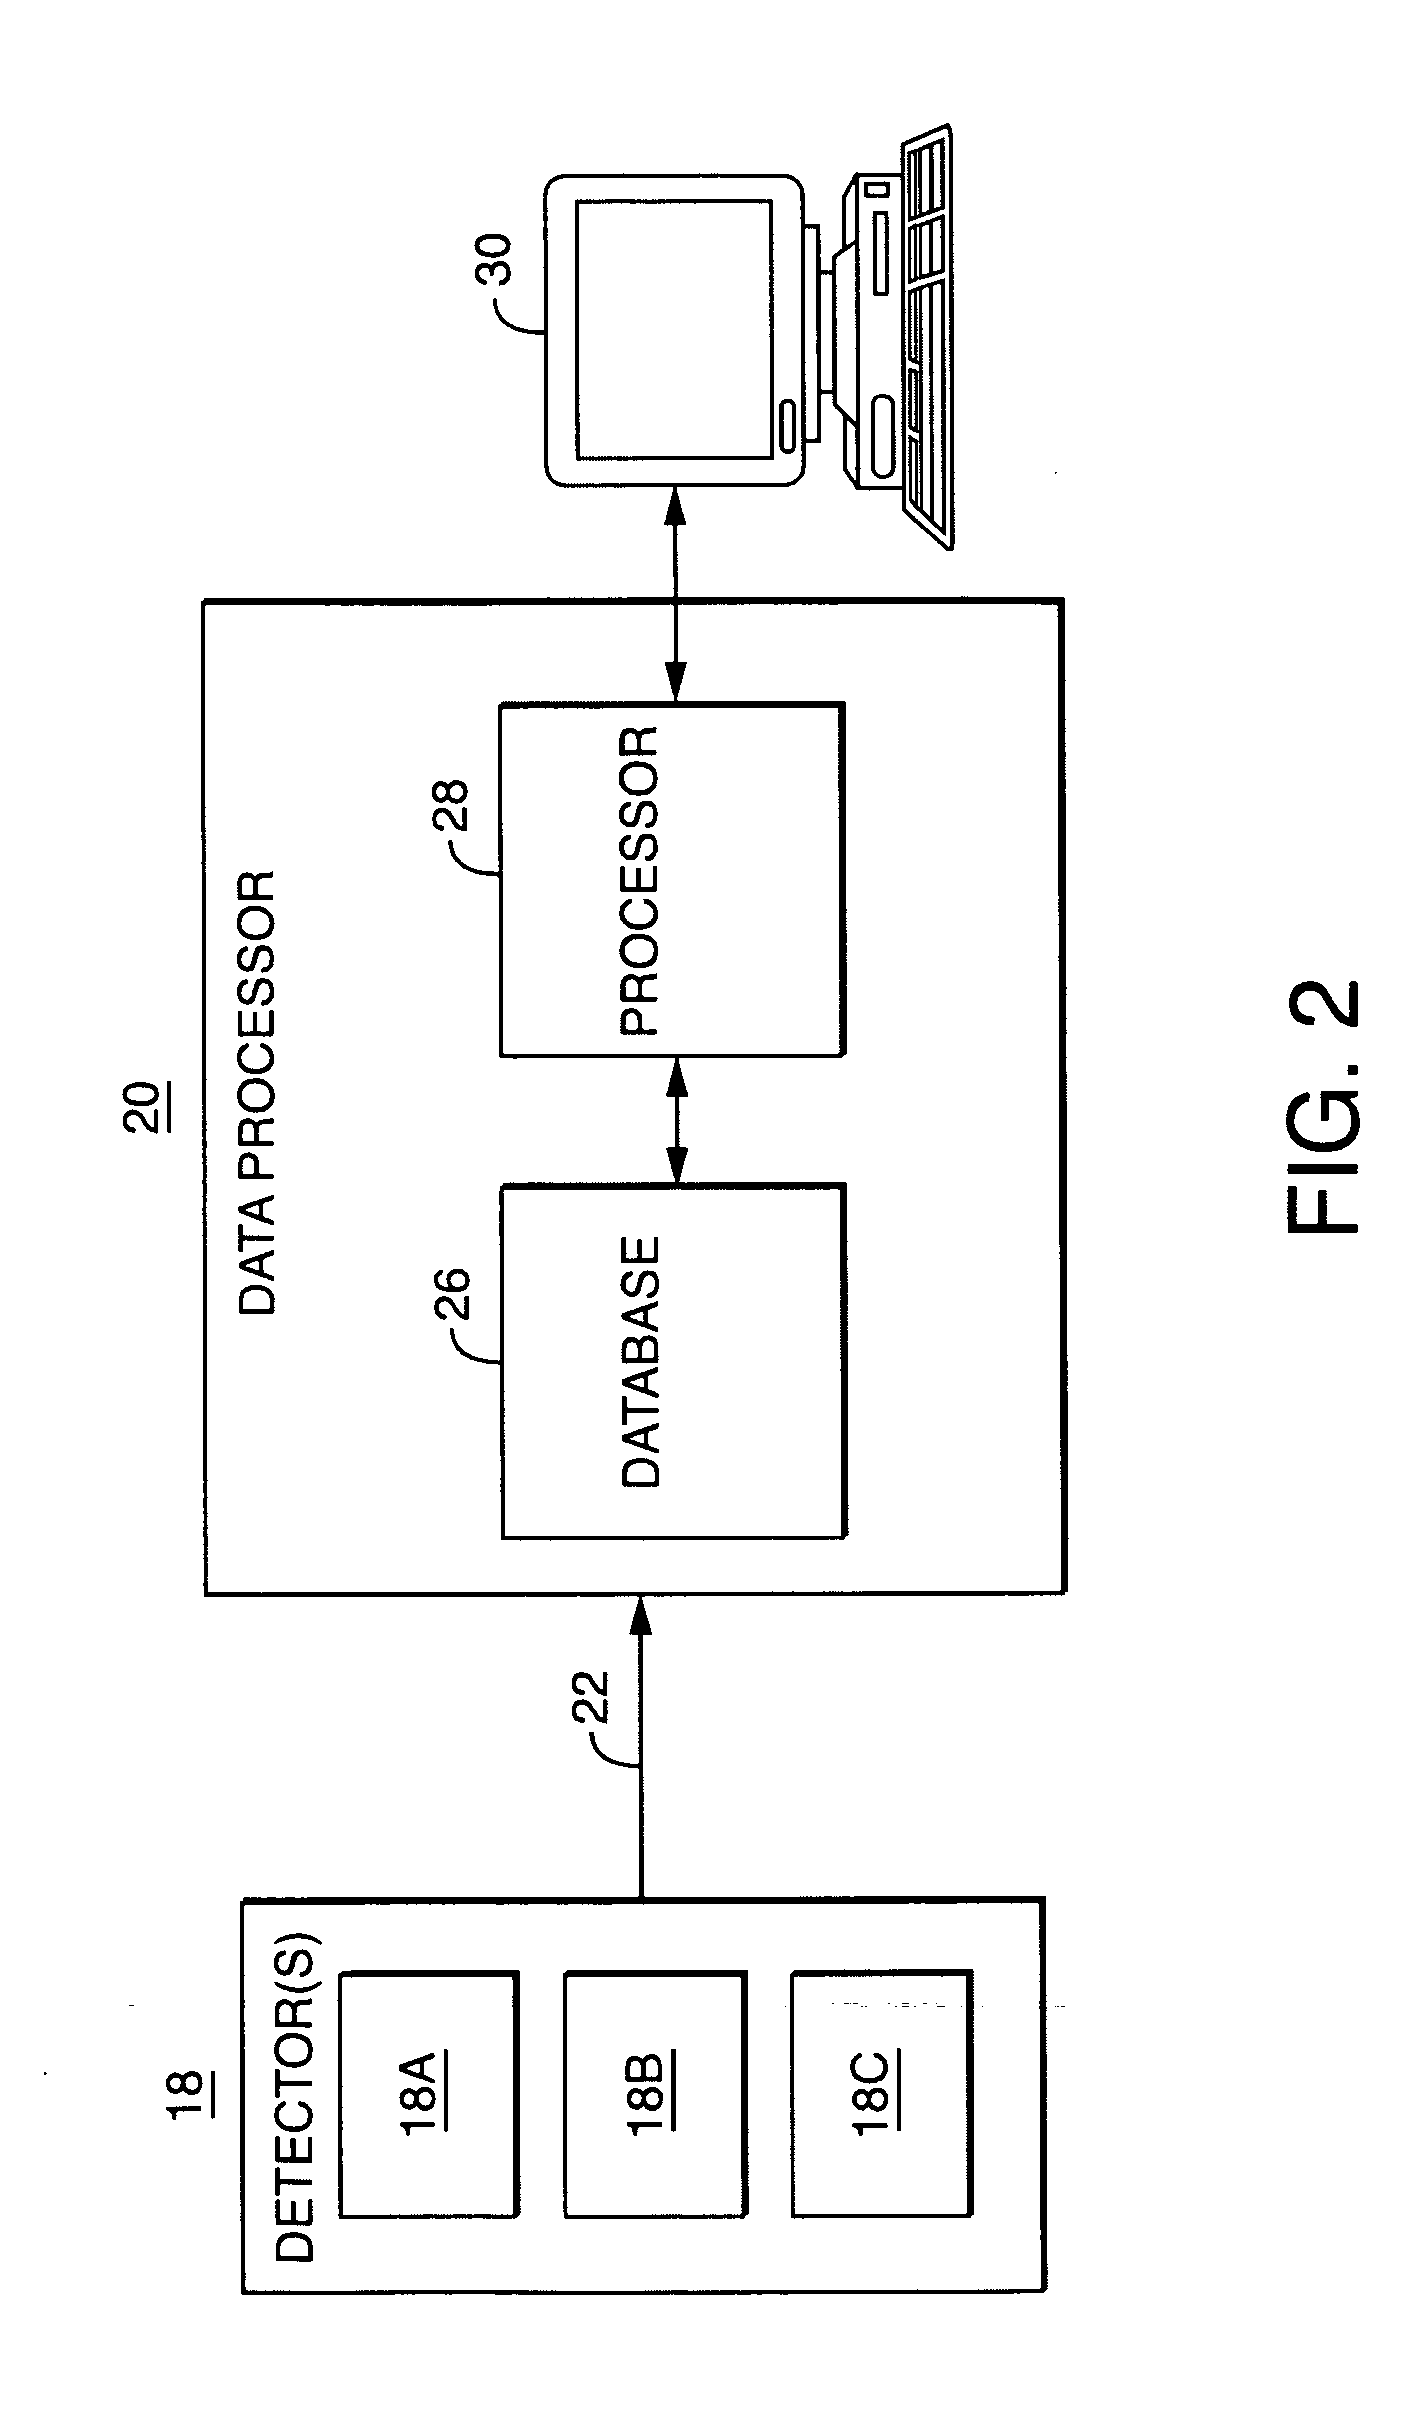 System and method for determining radius of gyration, molecular weight, and intrinsic viscosity of a polymeric distribution using gel permeation chromatography and light scattering detection